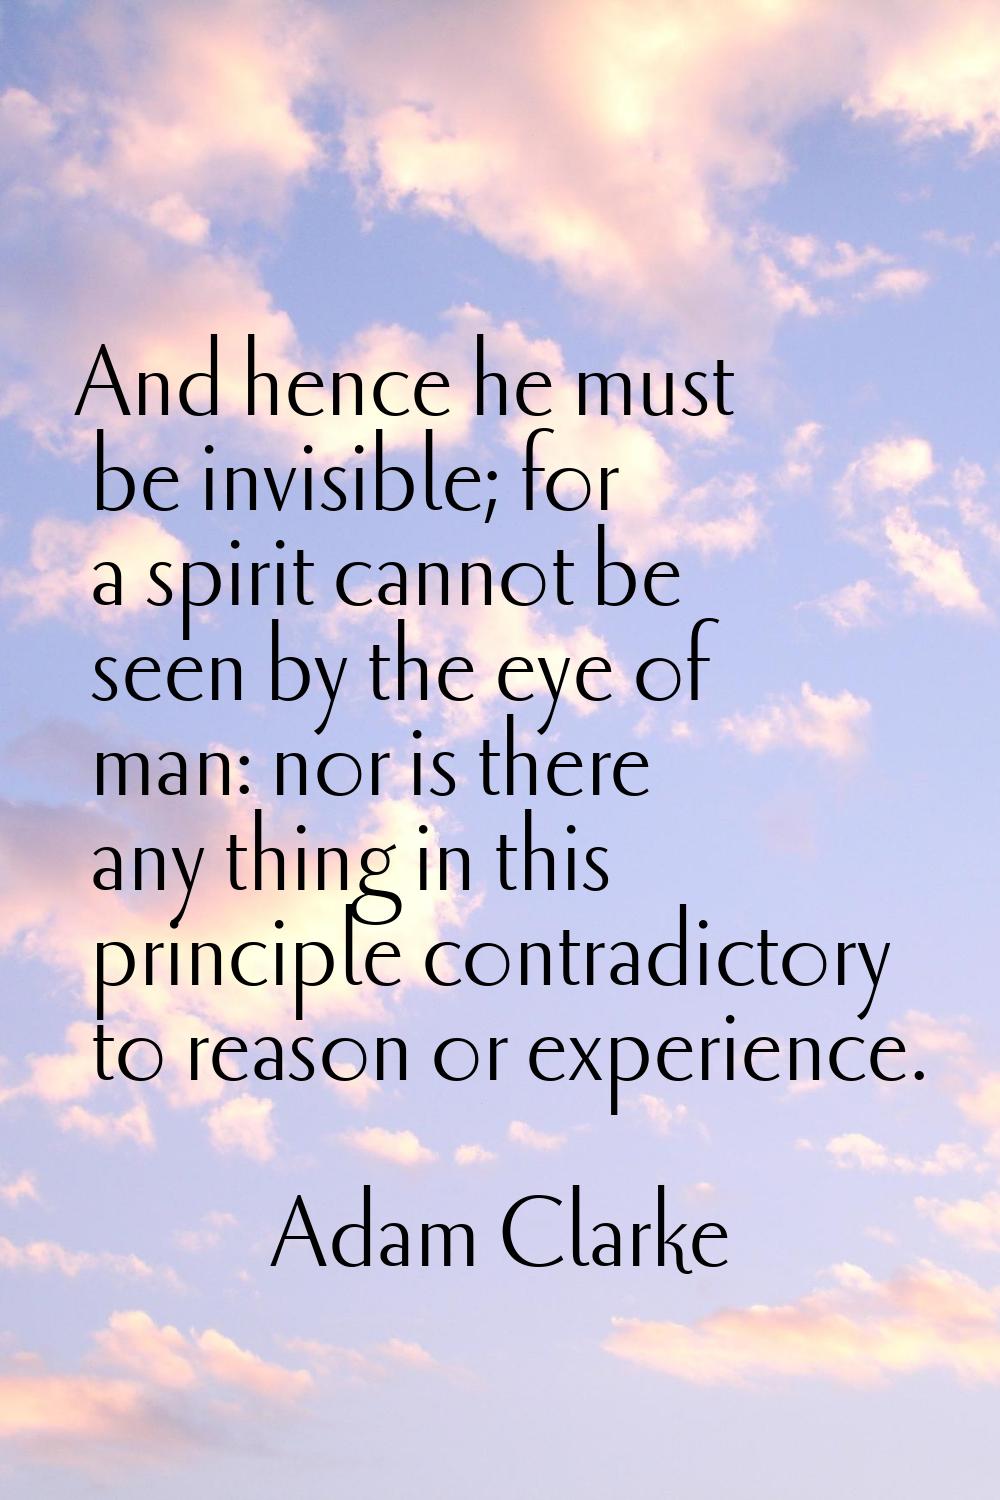 And hence he must be invisible; for a spirit cannot be seen by the eye of man: nor is there any thi